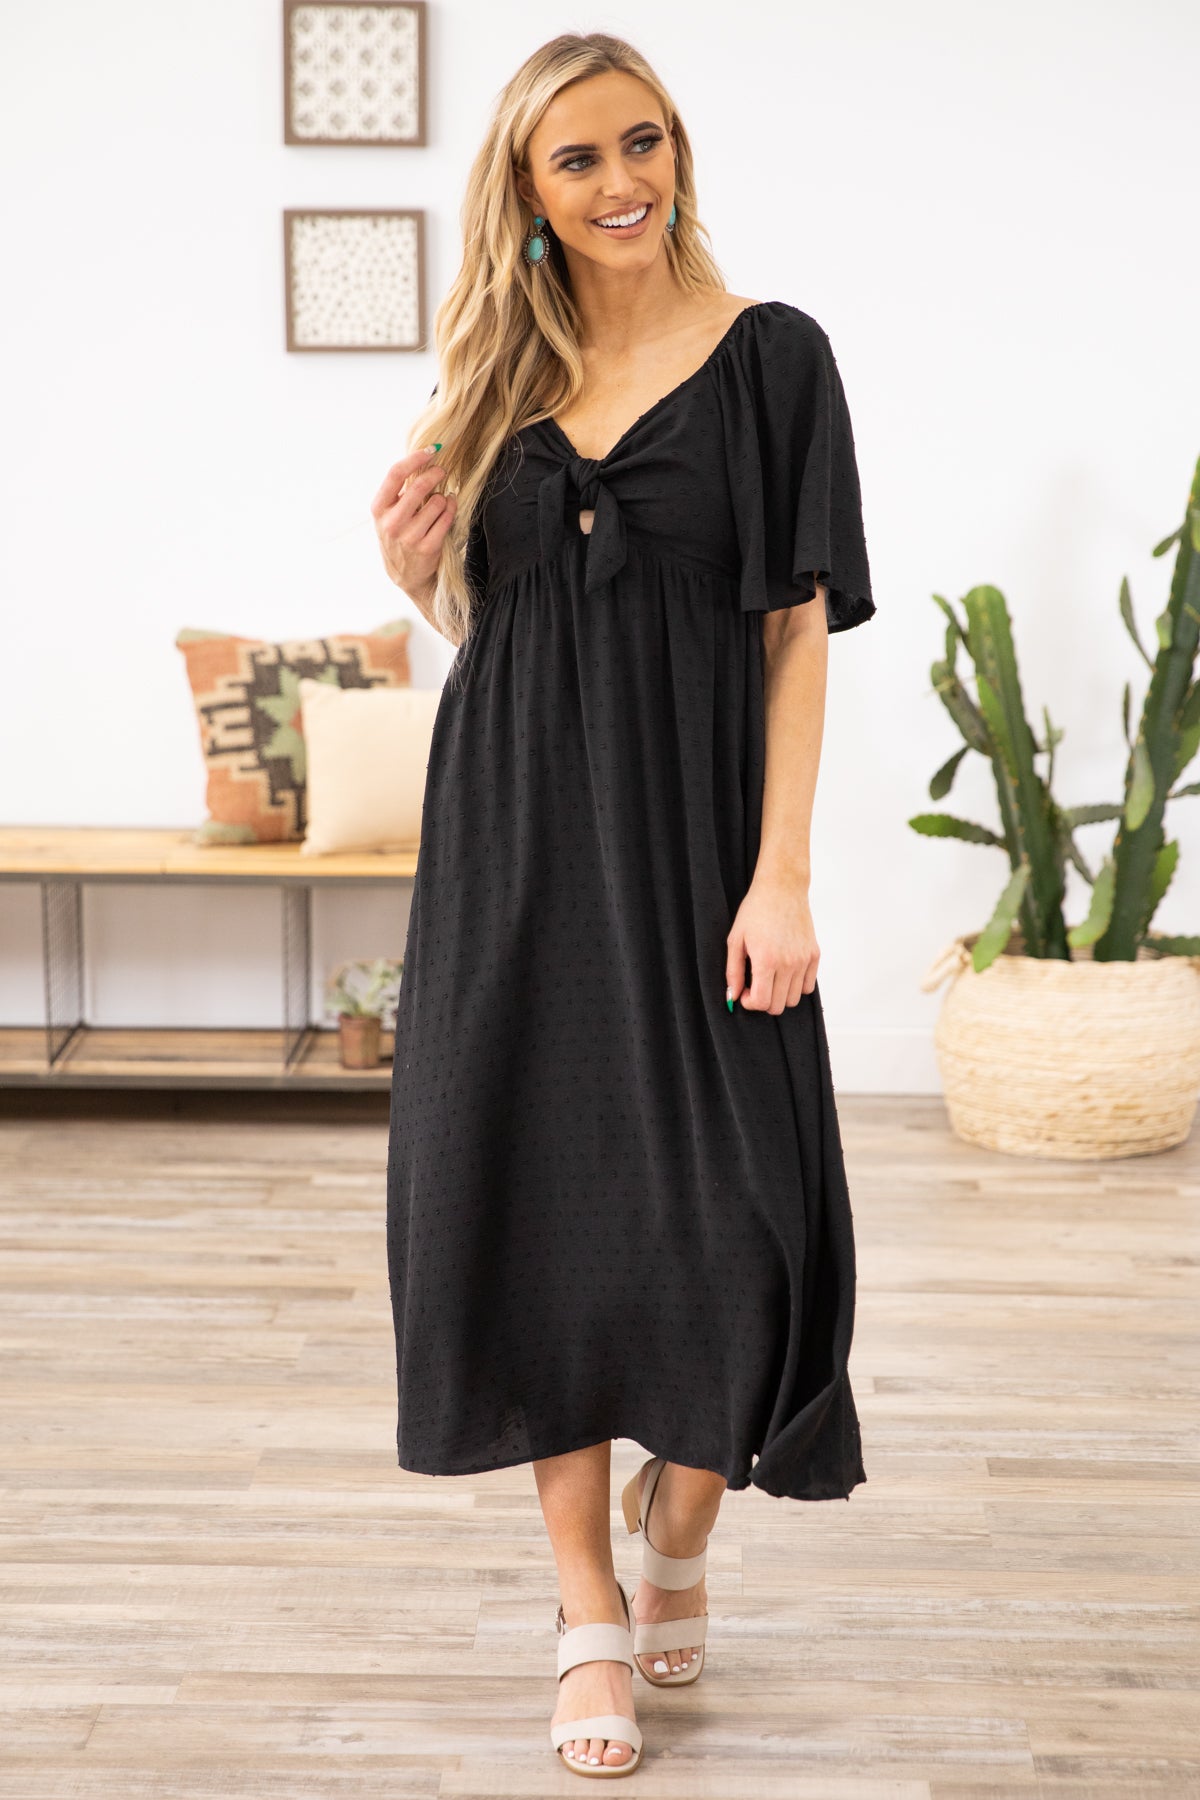 Black Flutter Sleeve Dress with Tie Detail - Filly Flair